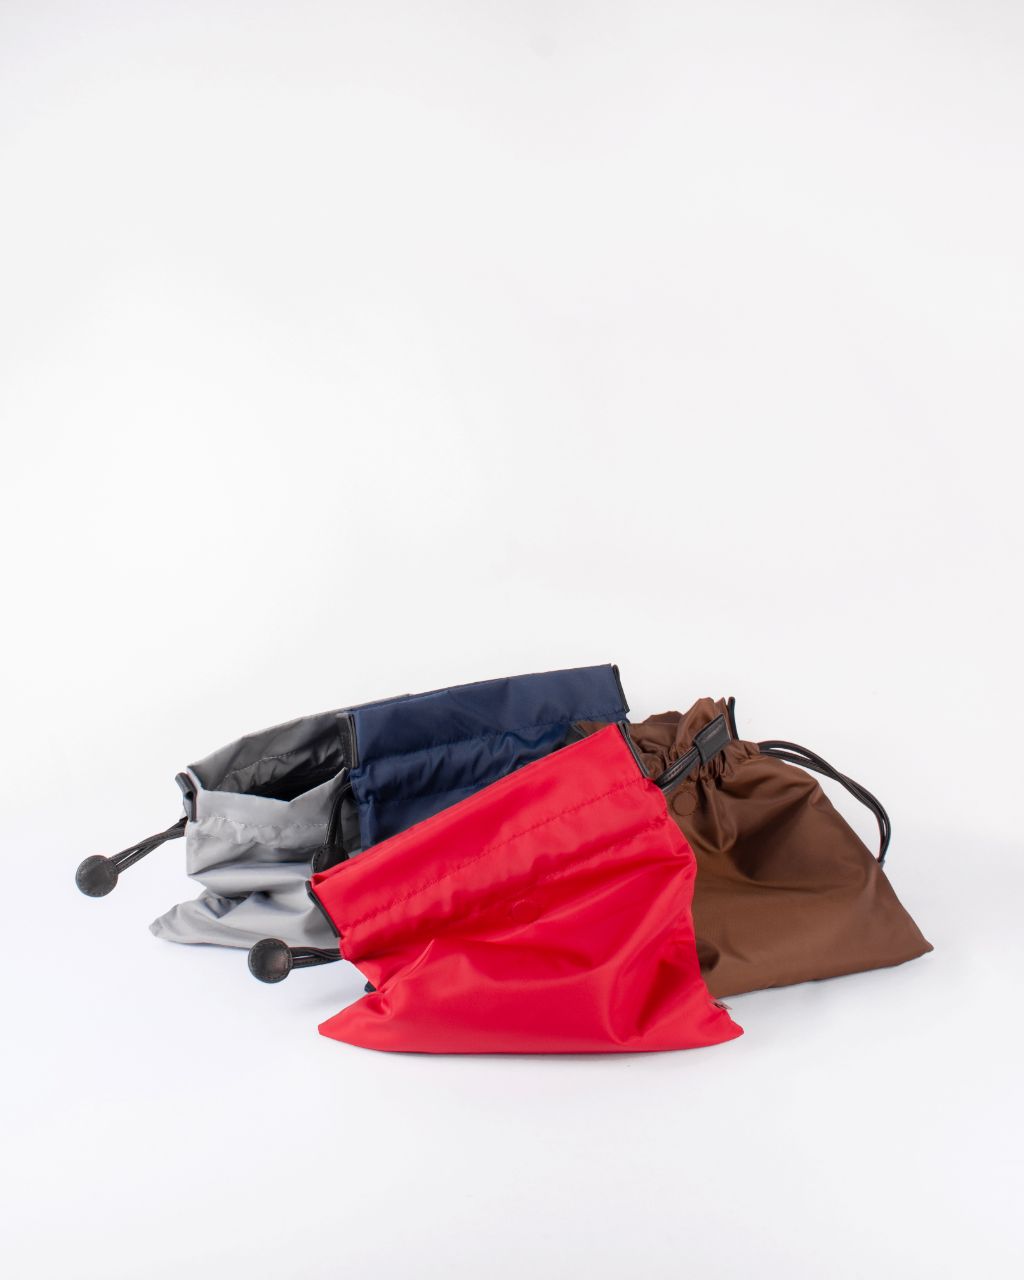 beans bag in red water repellent nylon and leather strap grey navy red brown